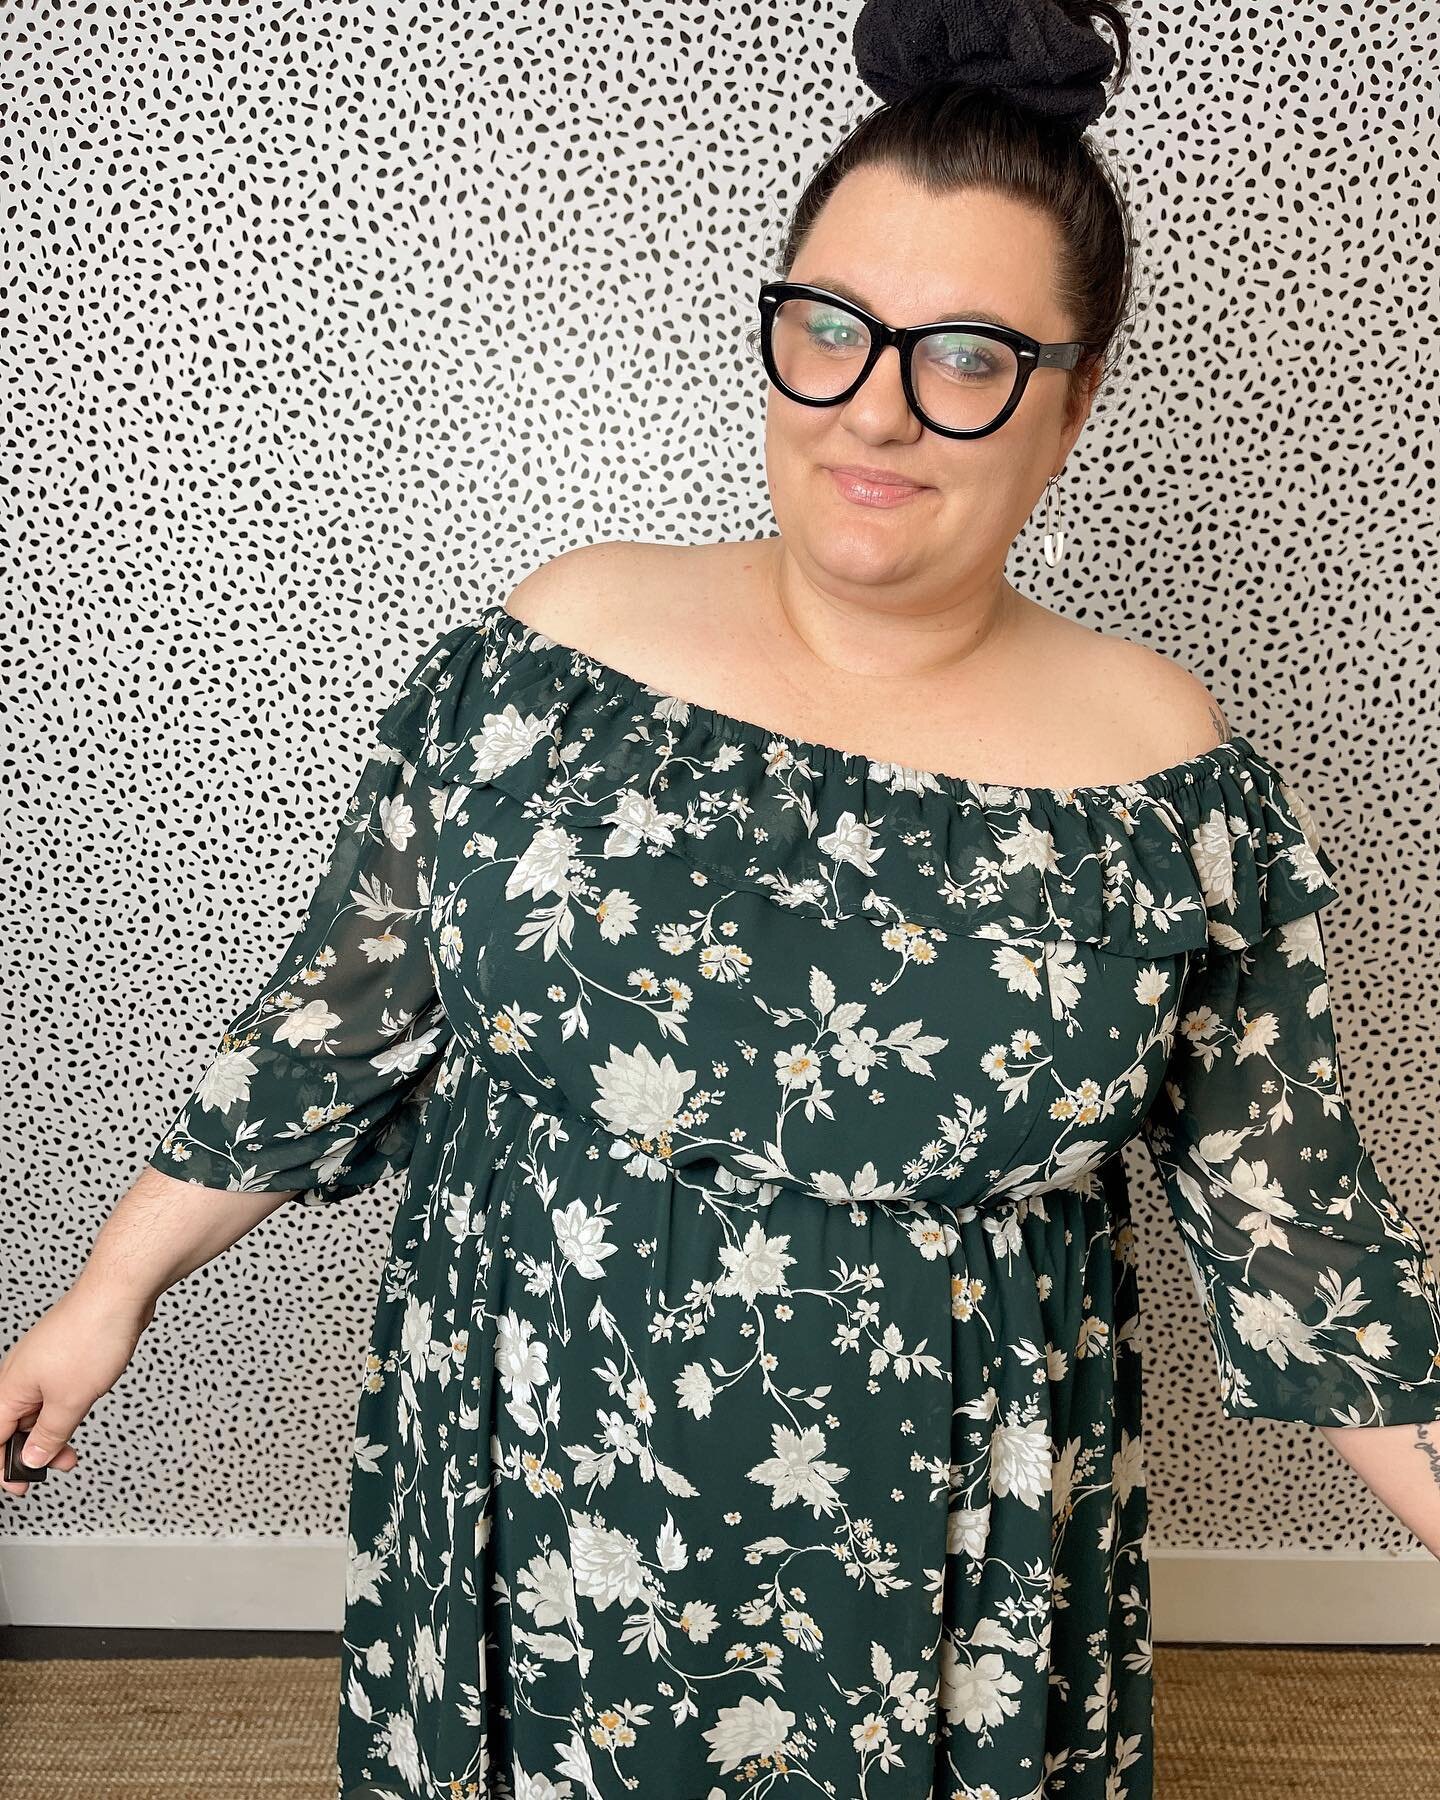 Playing dress up for @cakeplussize on this beautiful earth day. (Spot the clicker. lol.)

Shop these resale items in Cake&rsquo;s online shop now. I&rsquo;ll link in stories. Or, head over to the link in @cakeplussize&rsquo;s bio.